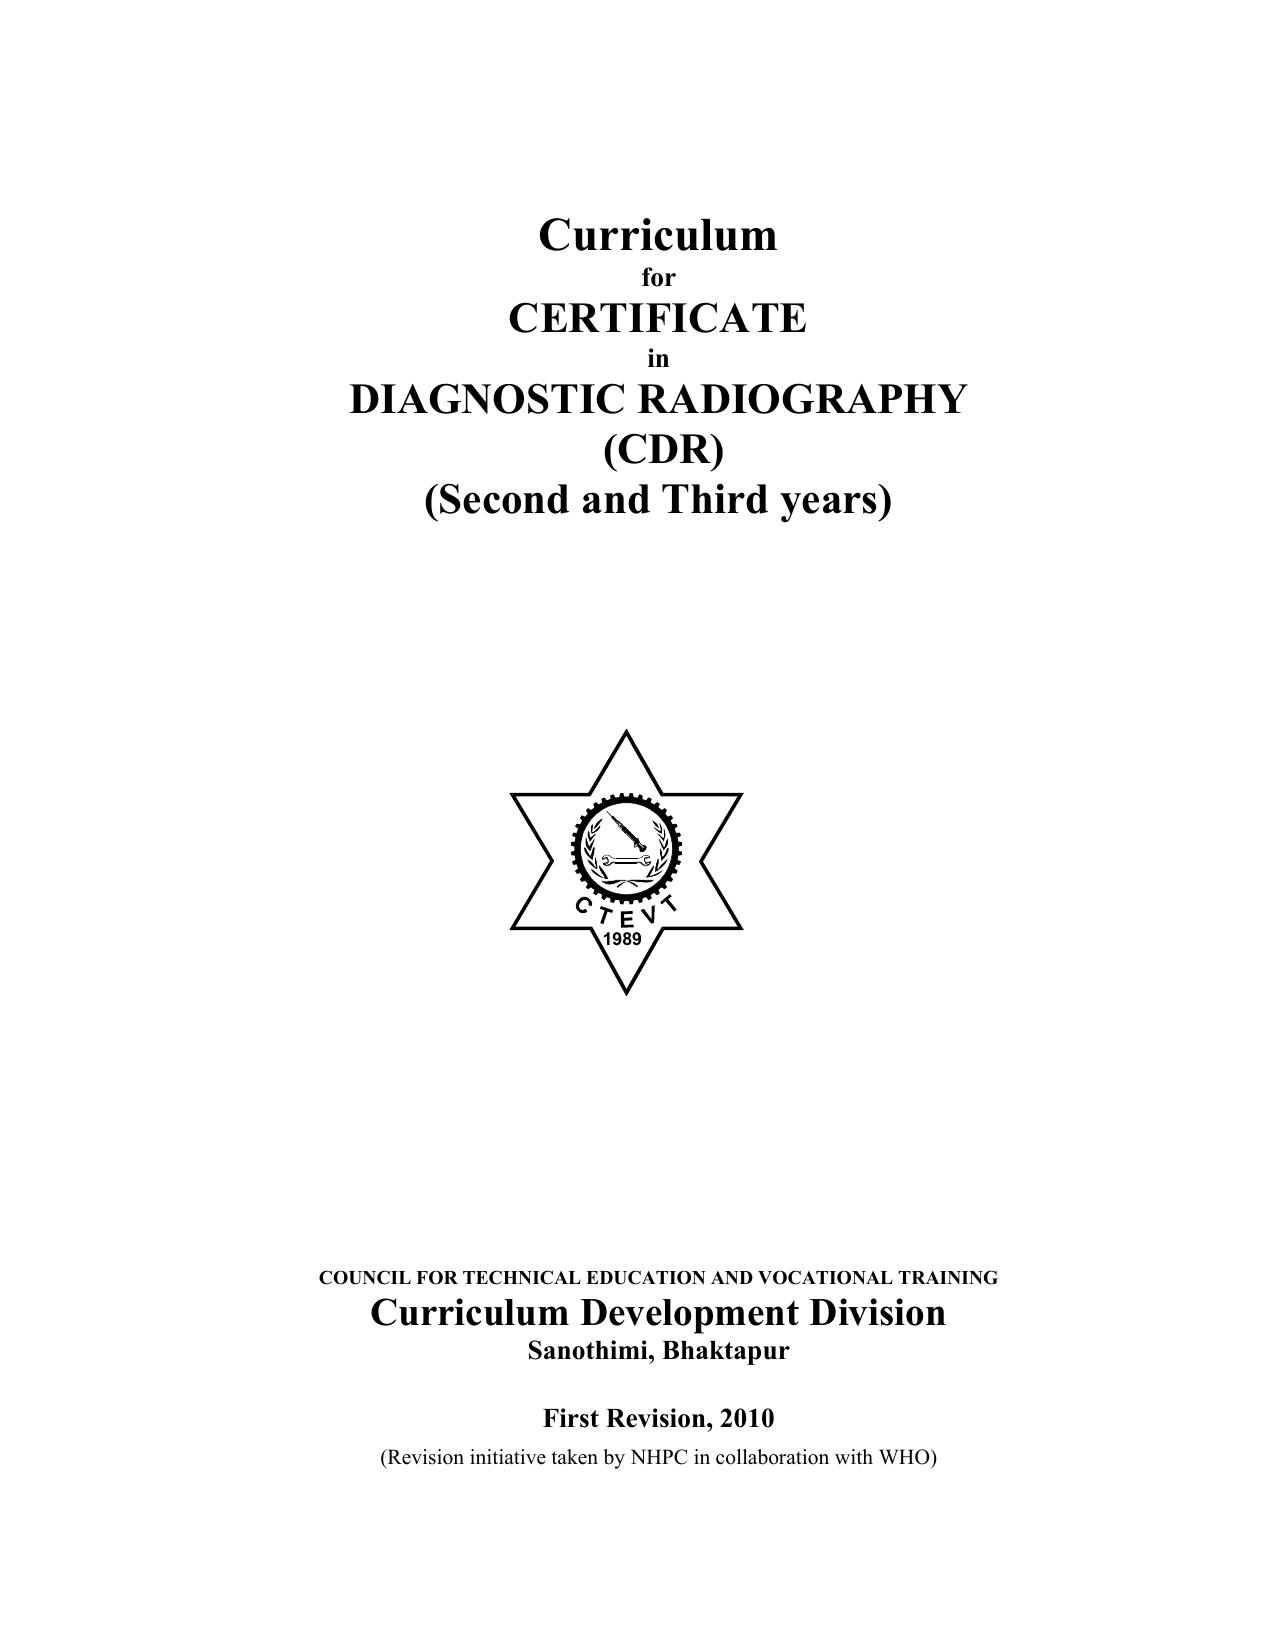 Certificate in Diagnostic Radiography, 2010